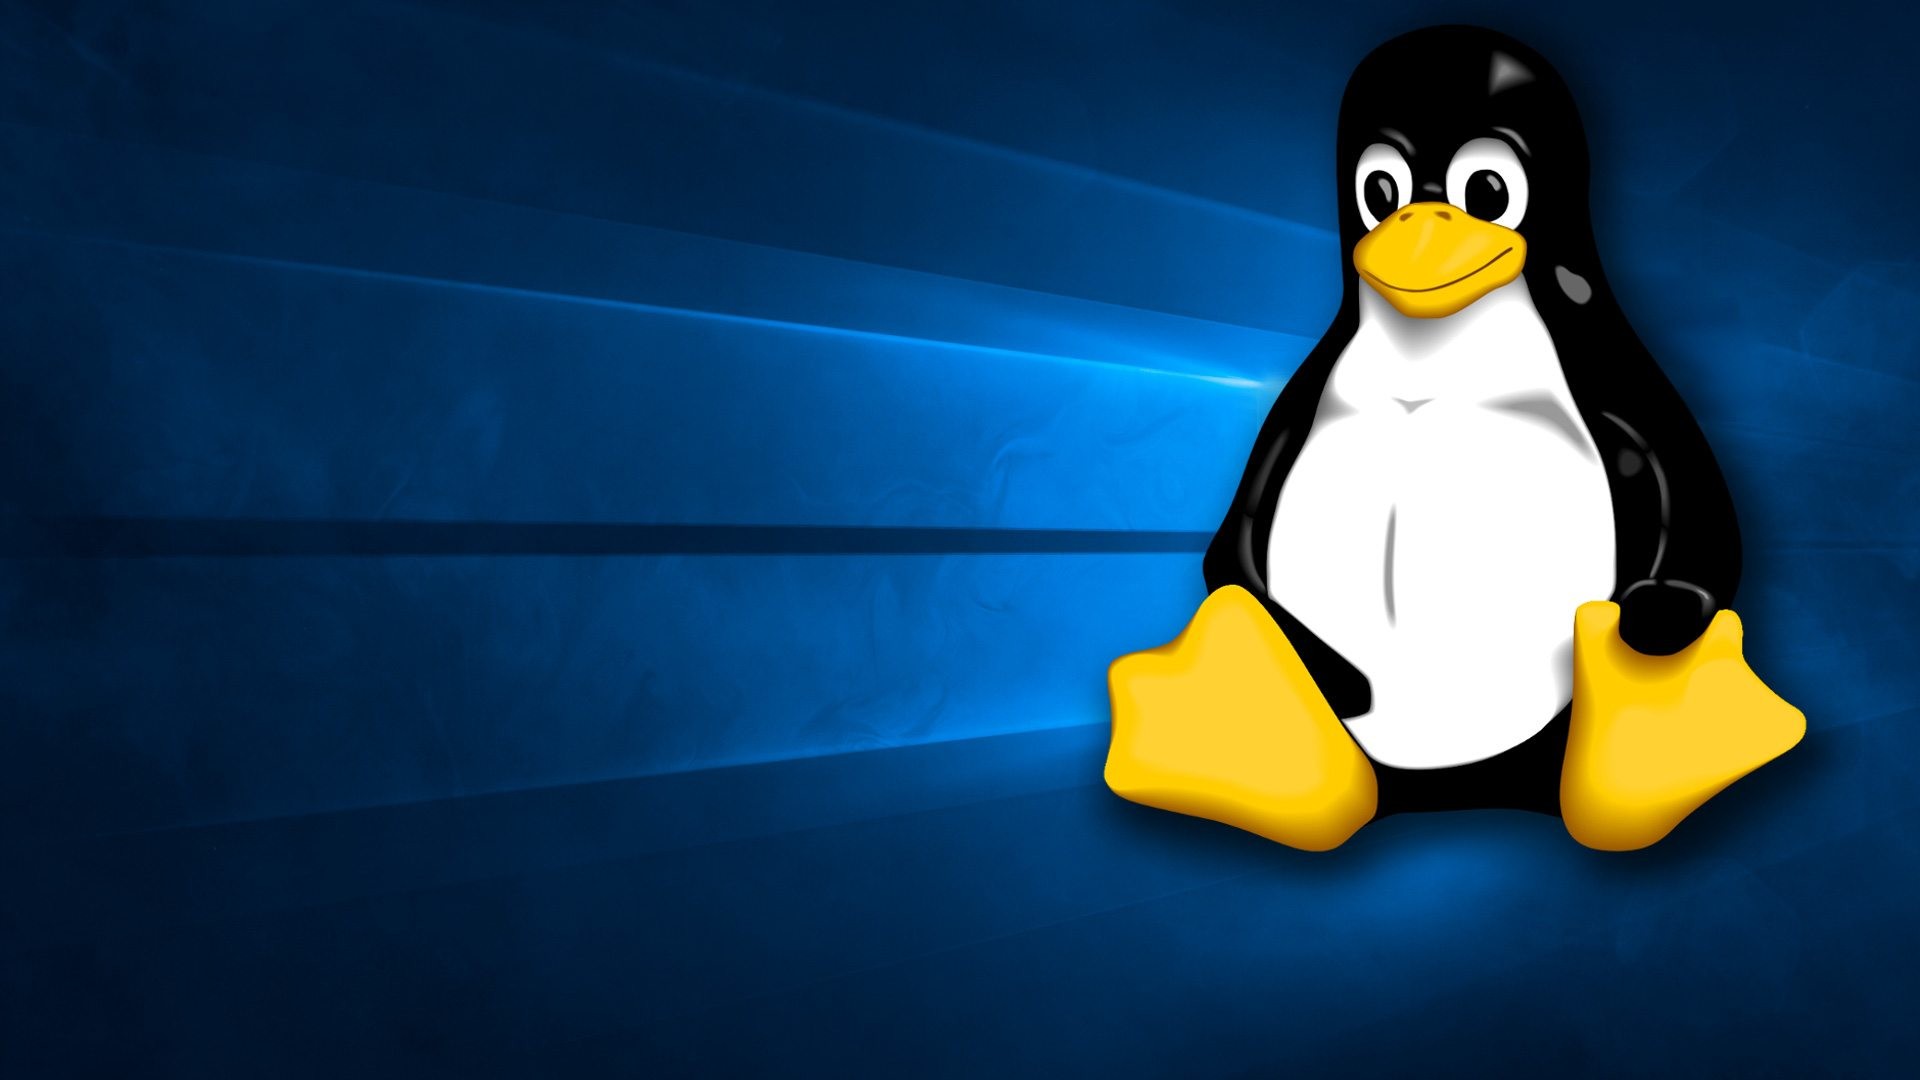 1920x1080 The Windows 10 wallpaper with Tux instead of the Windows logo HD Wallpaper  From Gallsource.